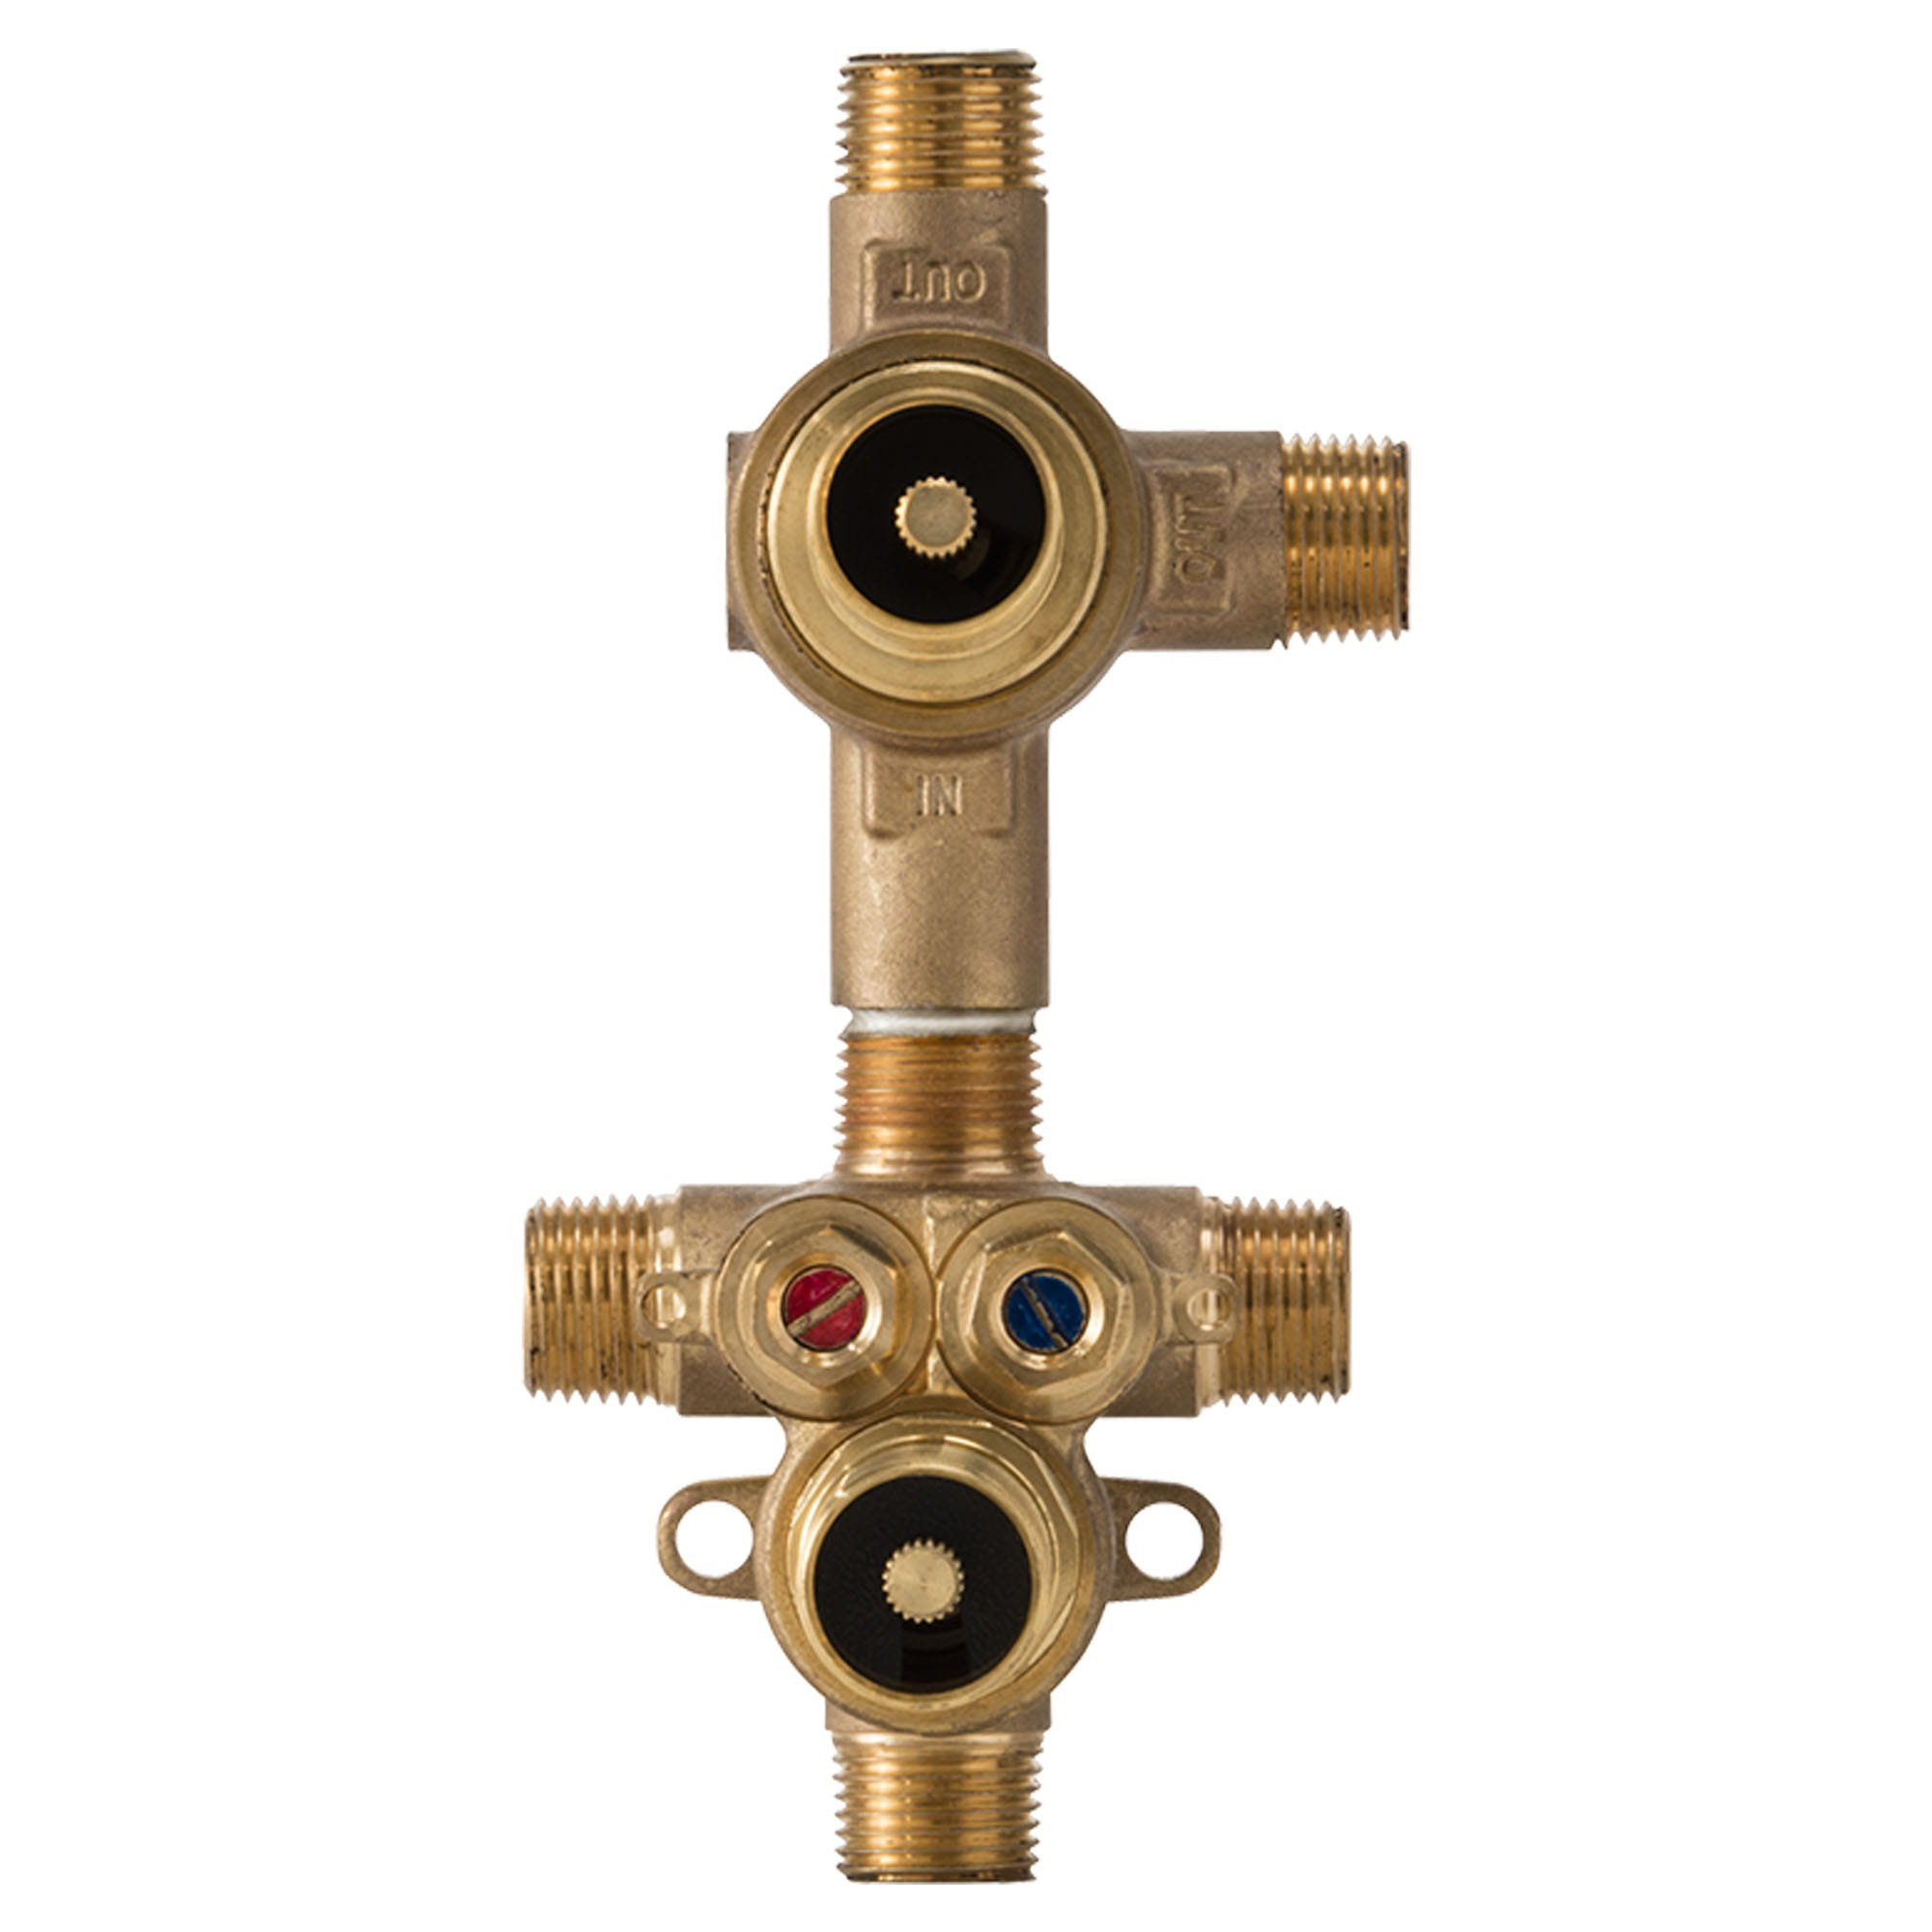 2-Handle Thermostatic Rough Valve with 2-Way Diverter Shared Functions